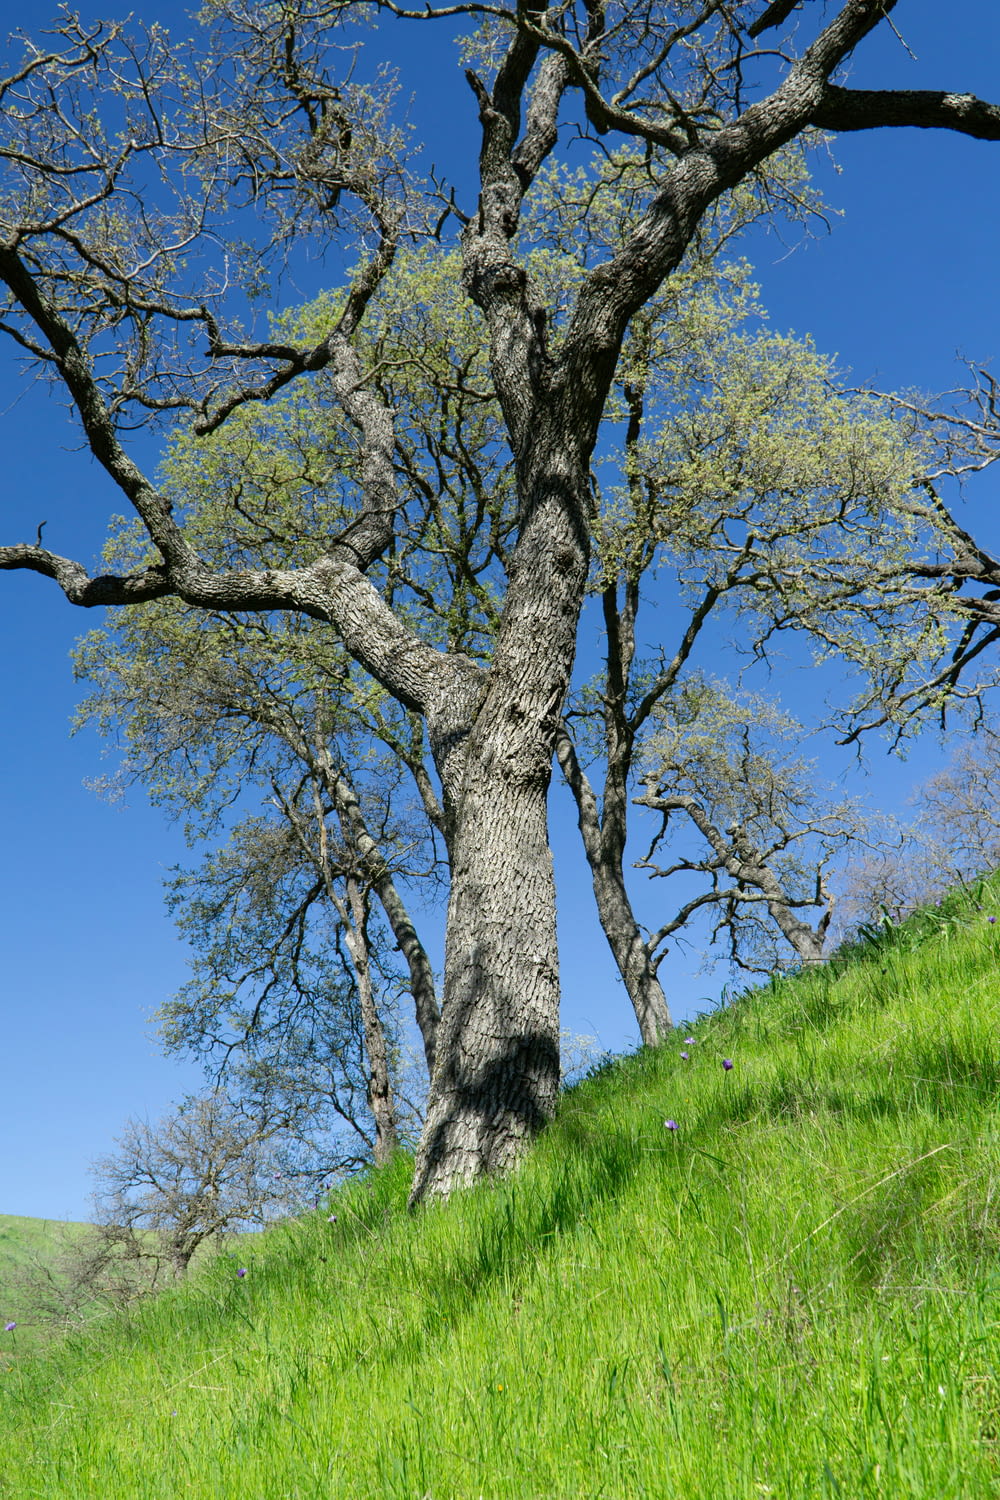 a large tree on a grassy hill with a blue sky in the background